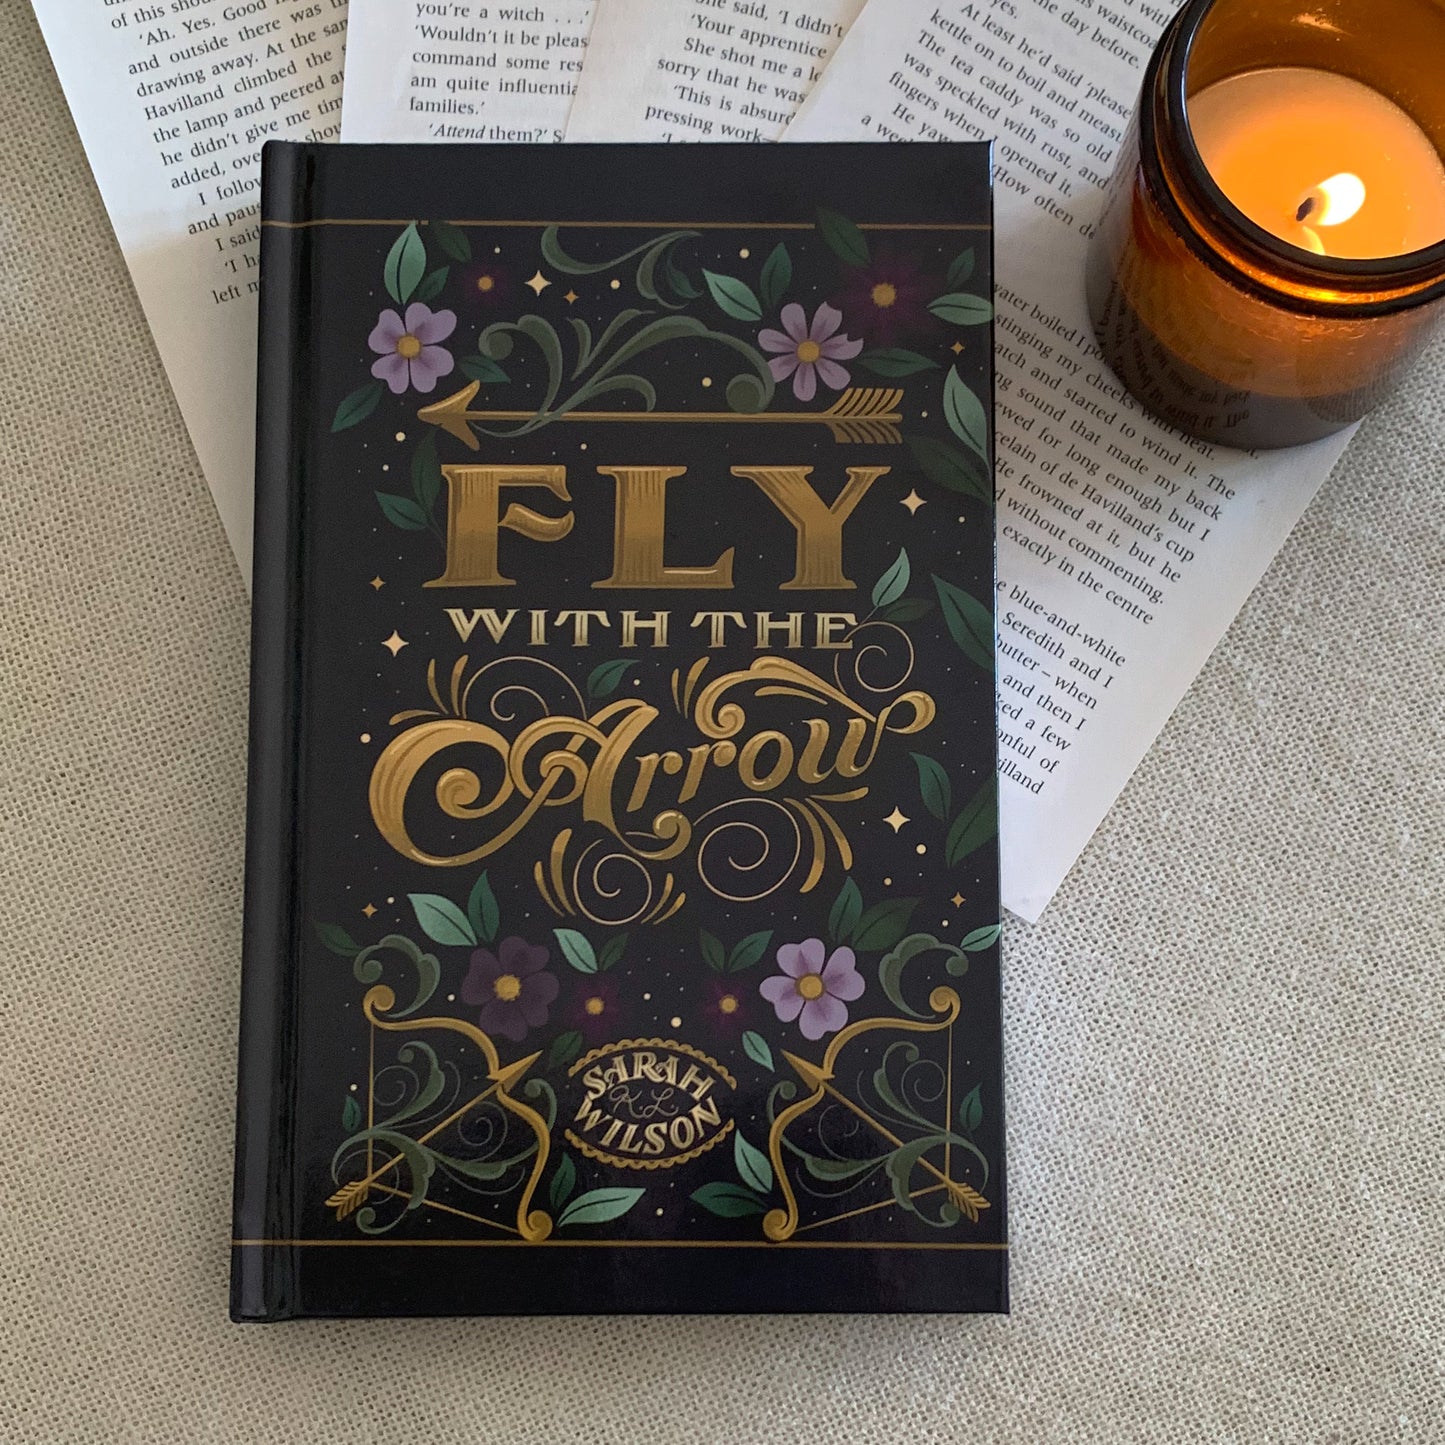 Fly with the Arrow - Hardcover by Sarah K L Wilson